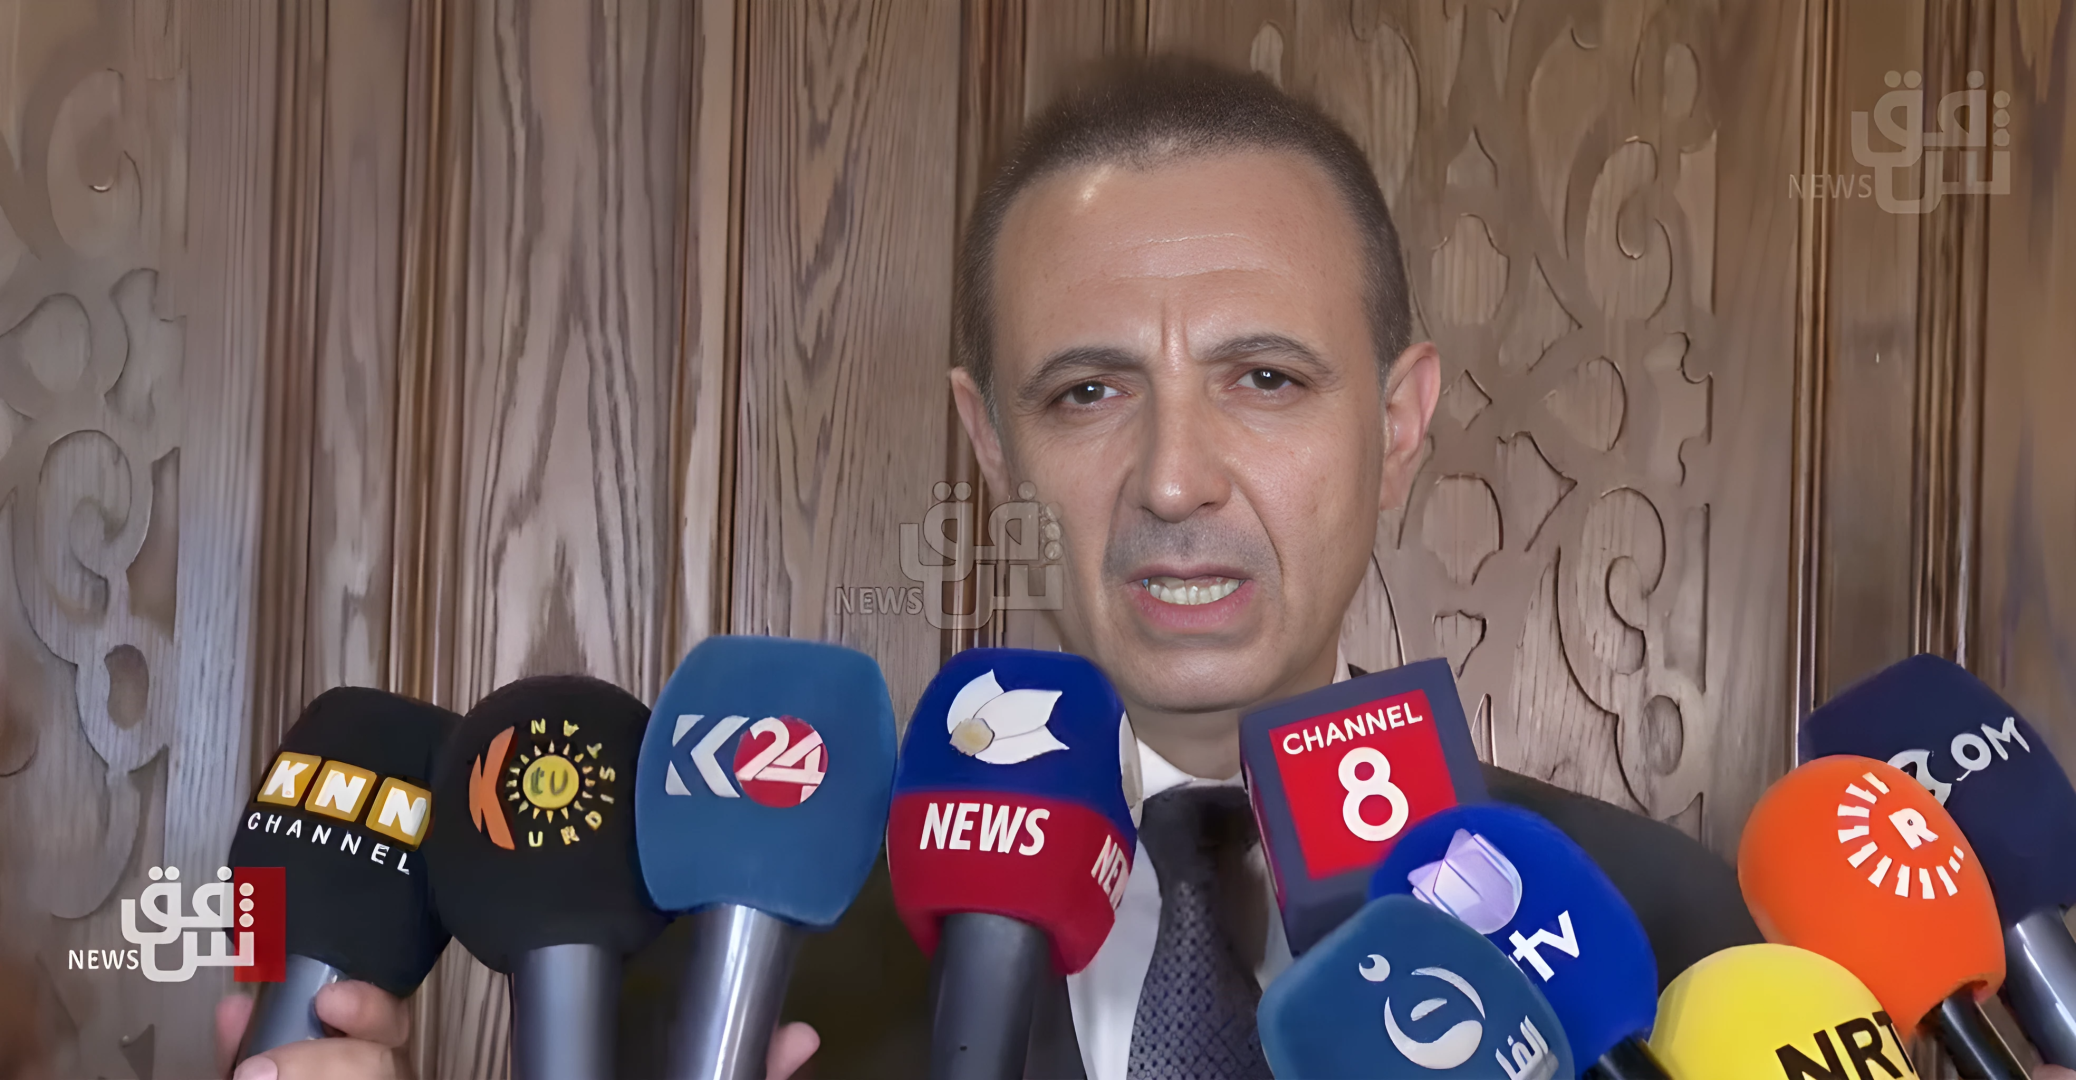 Kurdish President awaits IHEC's request for a new election date: spokesperson